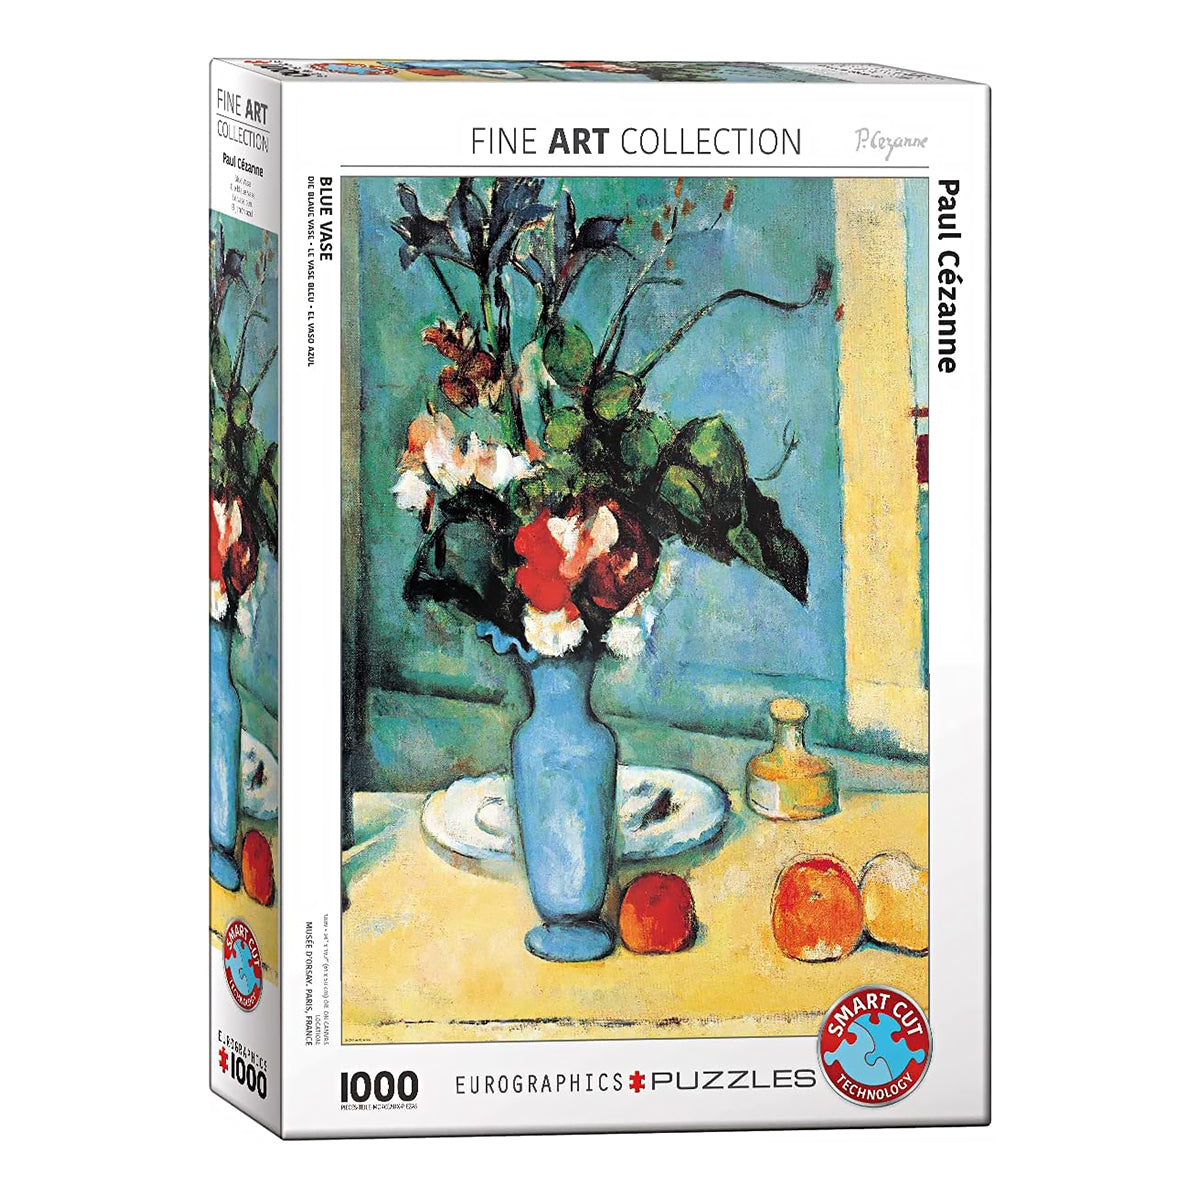 Exquisite wall art: Eurographics' 1000-piece Paul Cezanne Blue Vase jigsaw puzzle, a challenge for art enthusiasts.